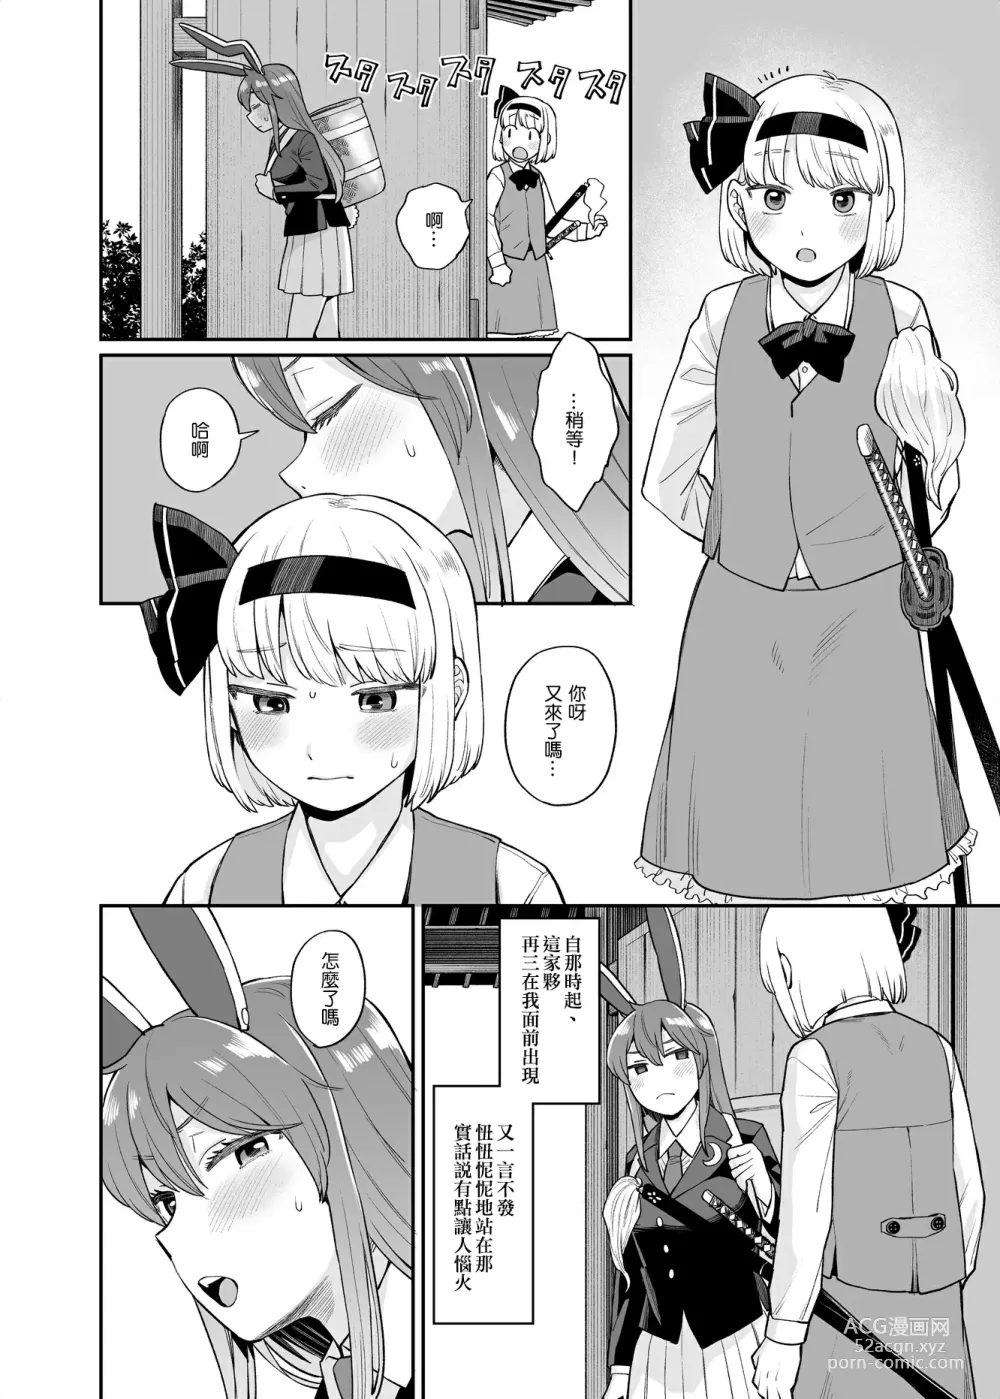 Page 2 of doujinshi 乌冬铃仙系列第3话